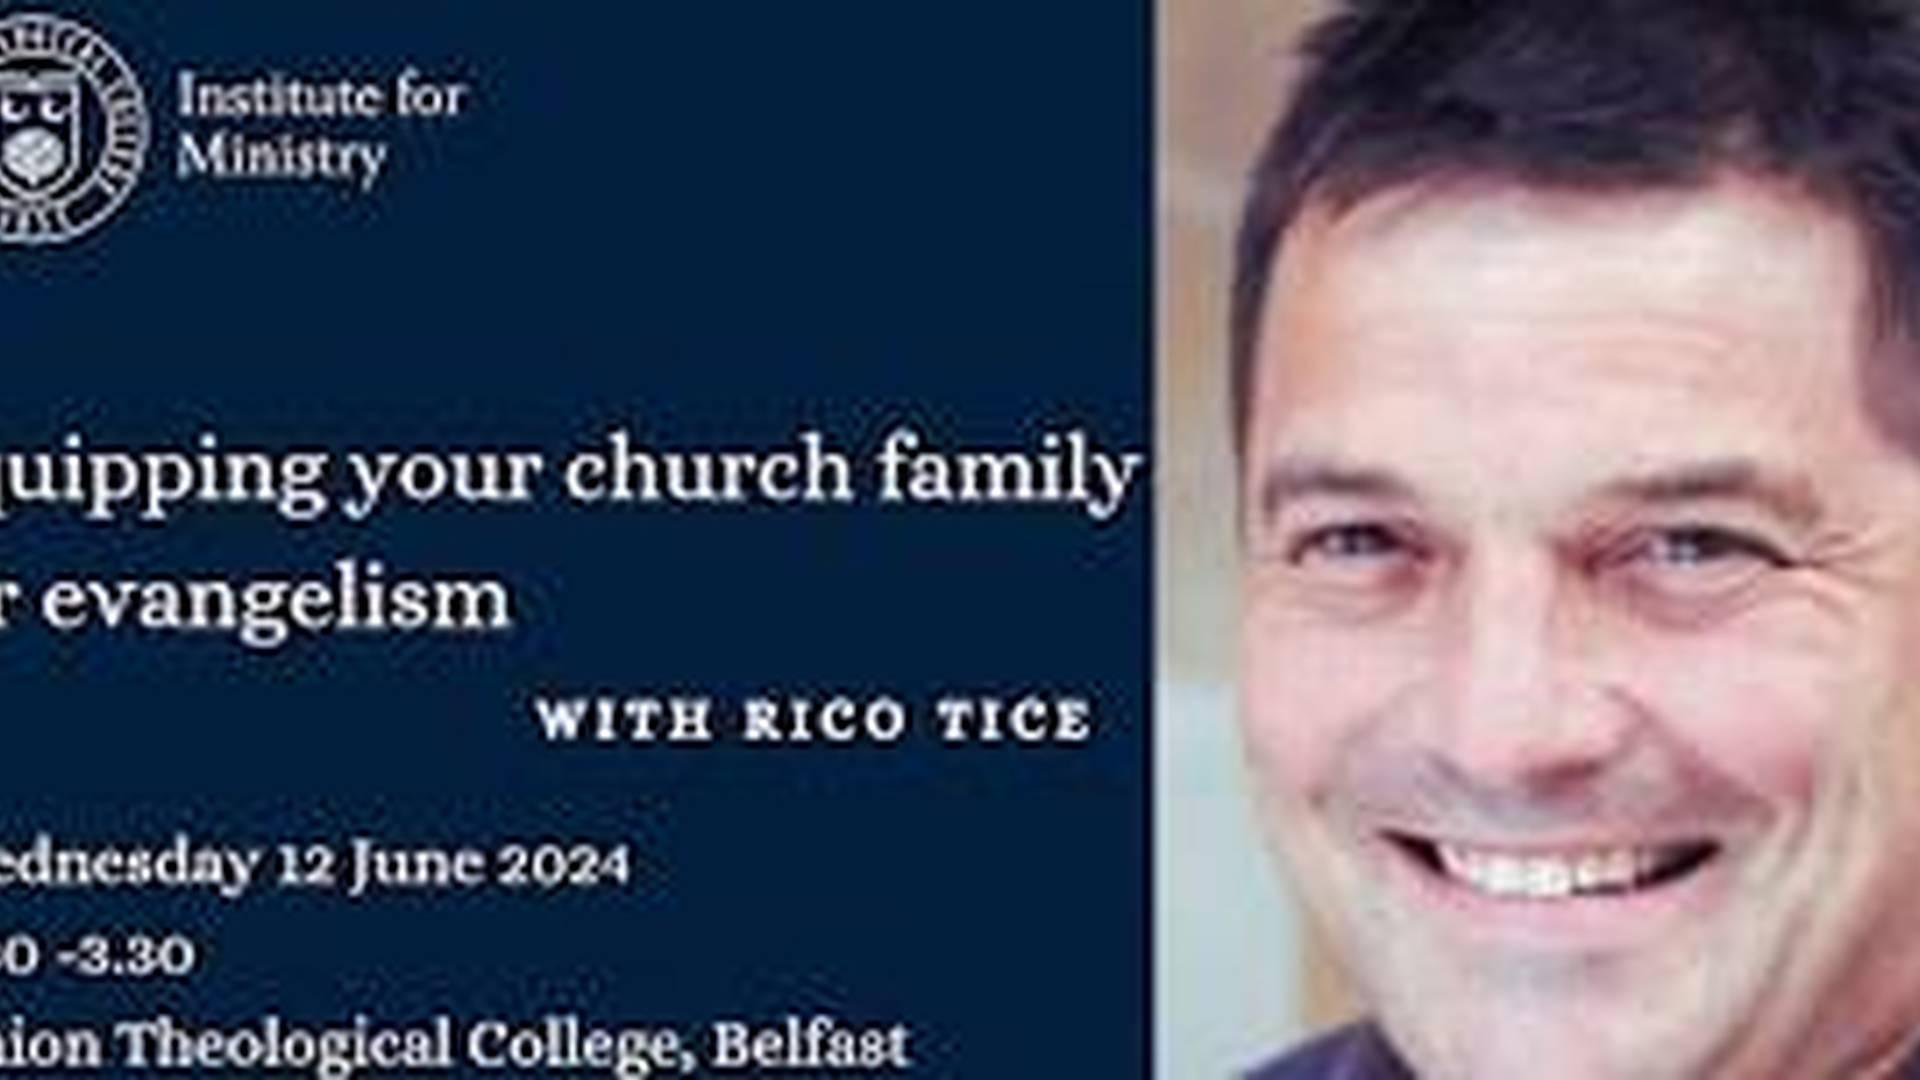 Equipping your church family for evangelism, with Rico Tice photo